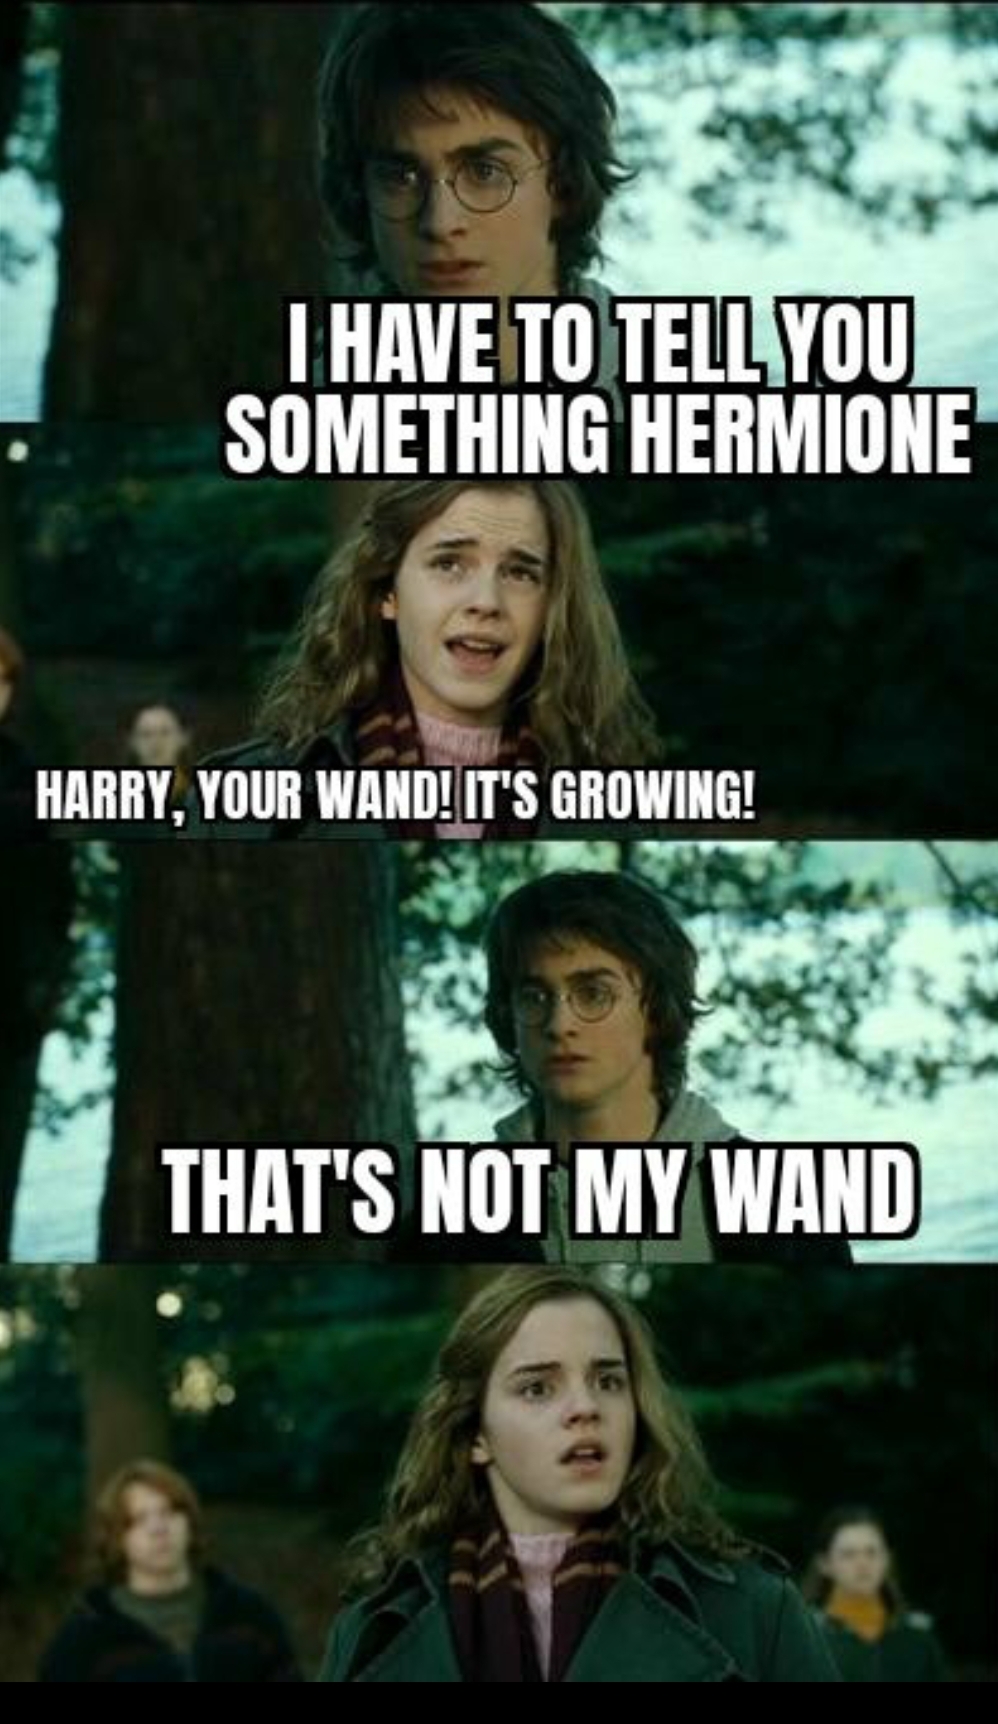 The Best, Funniest, and Most Ridiculous Harry Potter Memes to Come